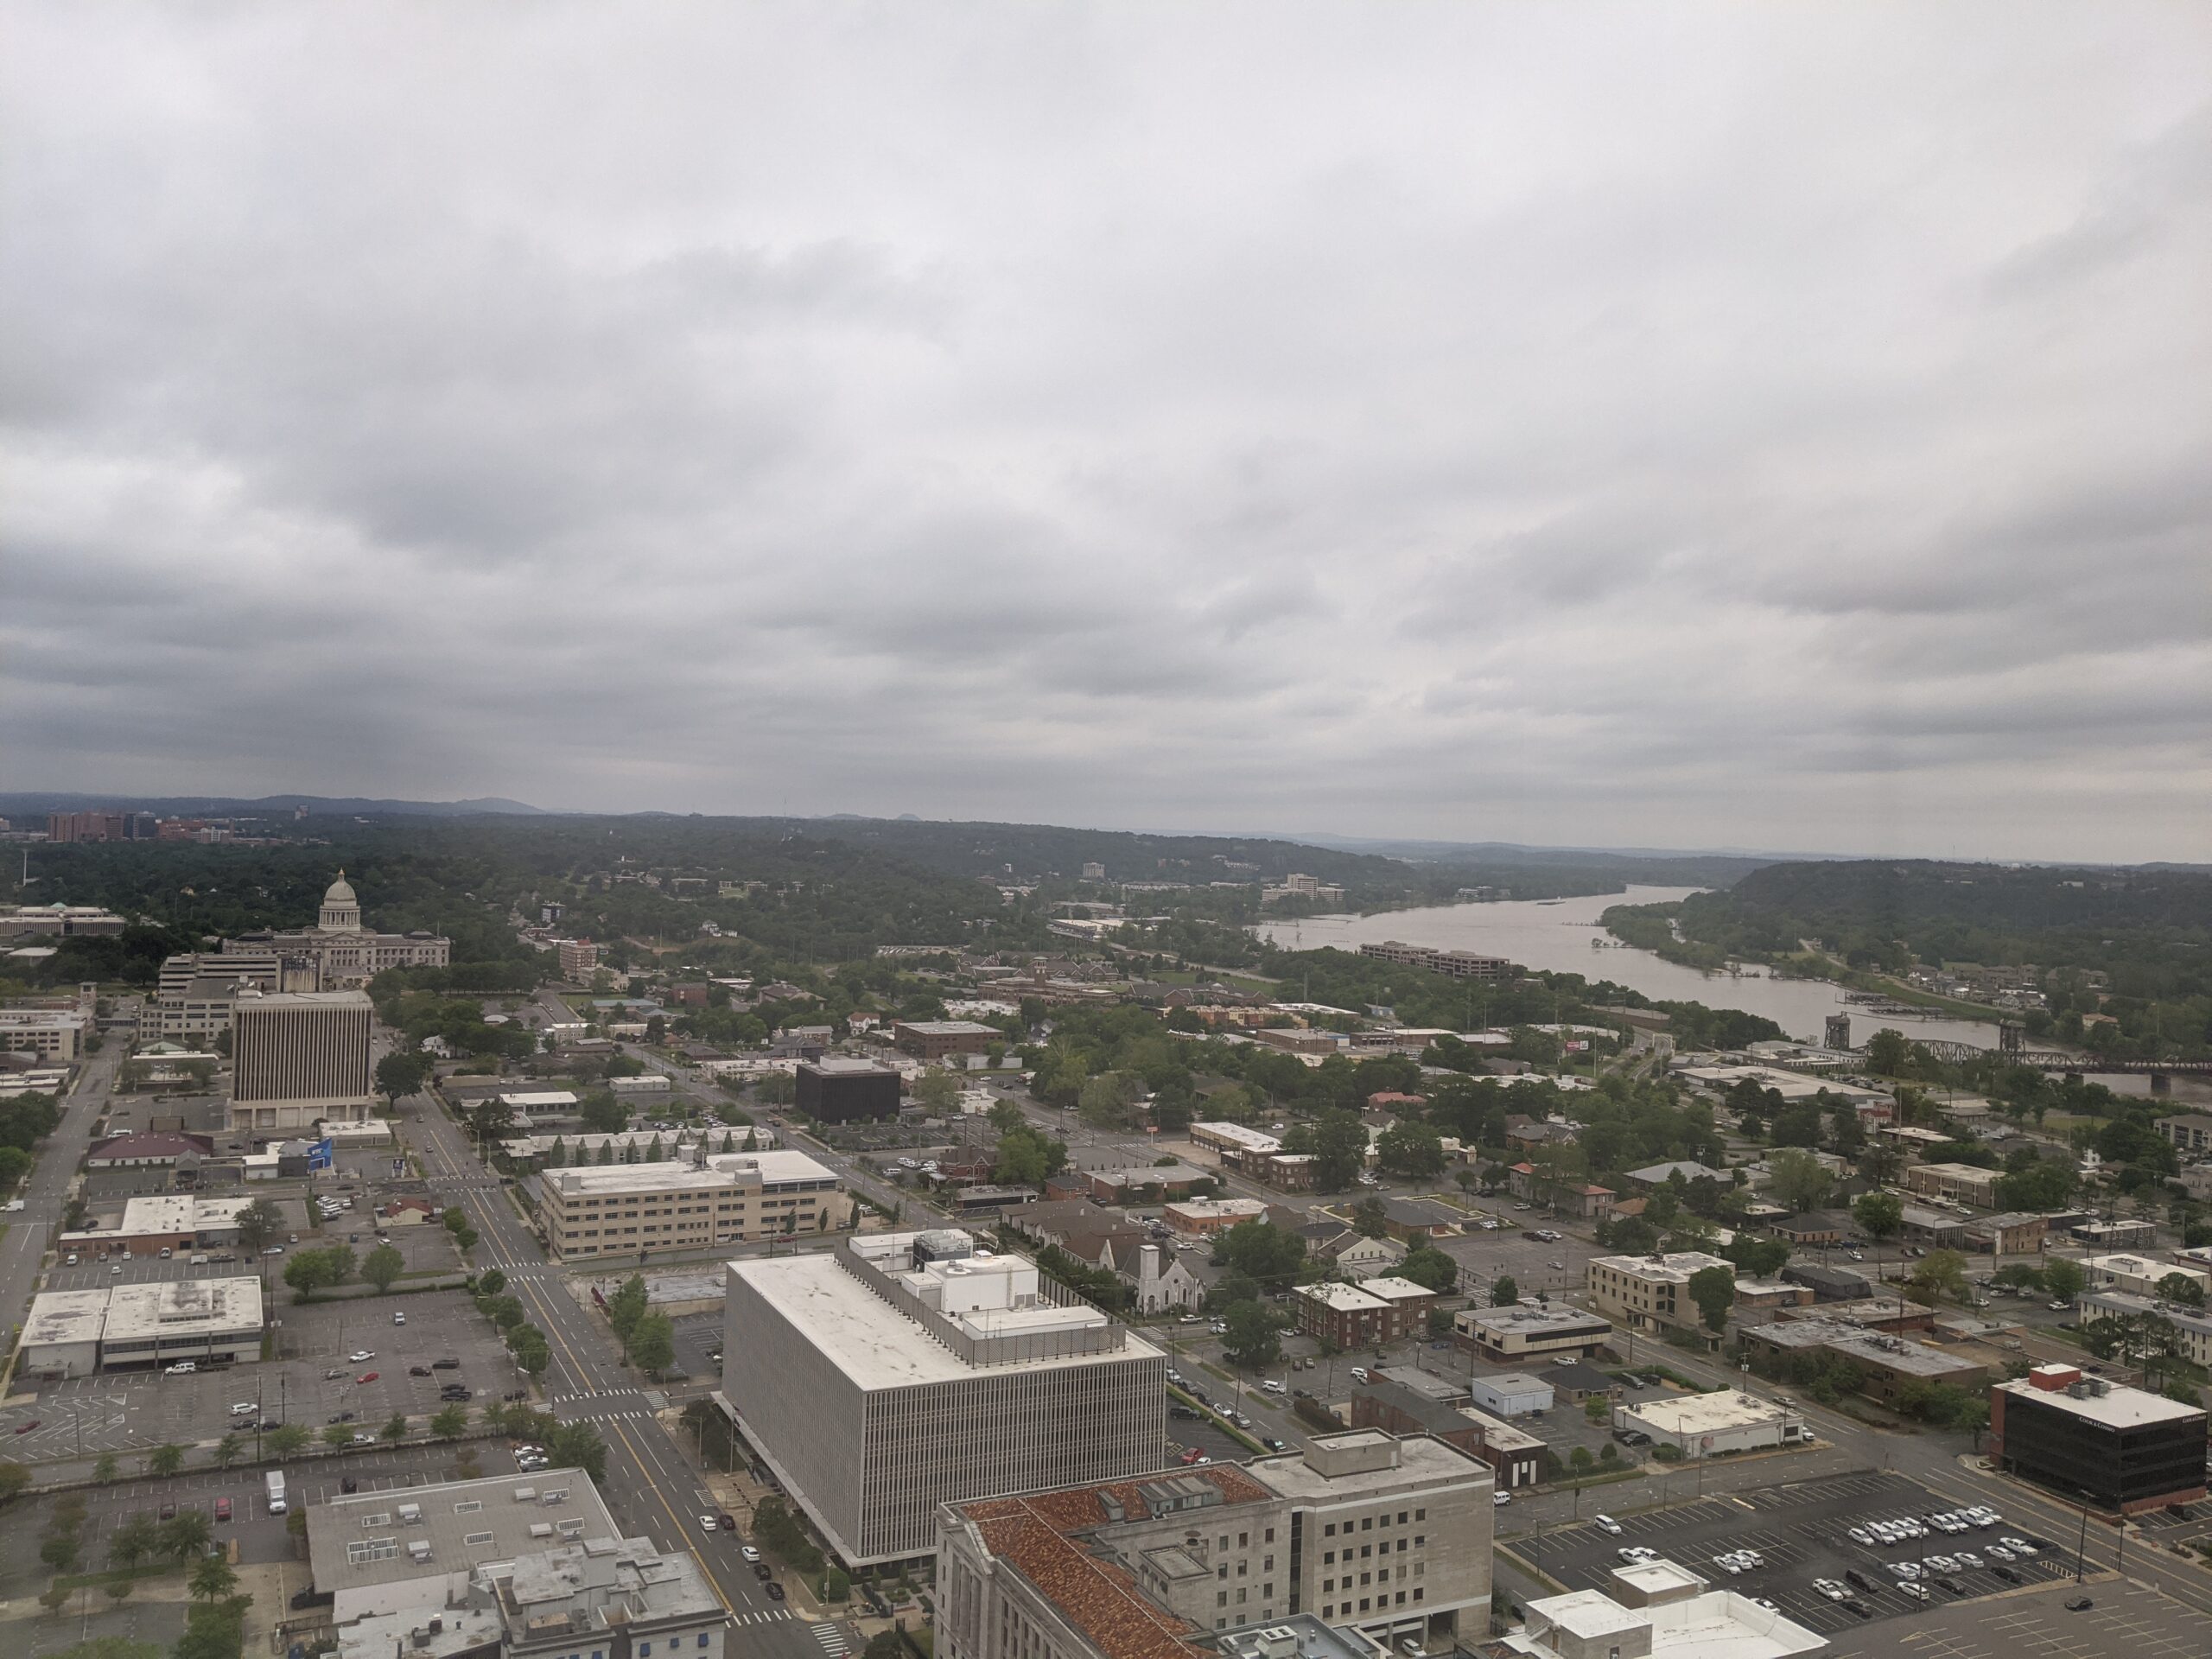 Aerial photo of the city of Little Rock with the state capitol building on the left and the Arkansas river on the right.